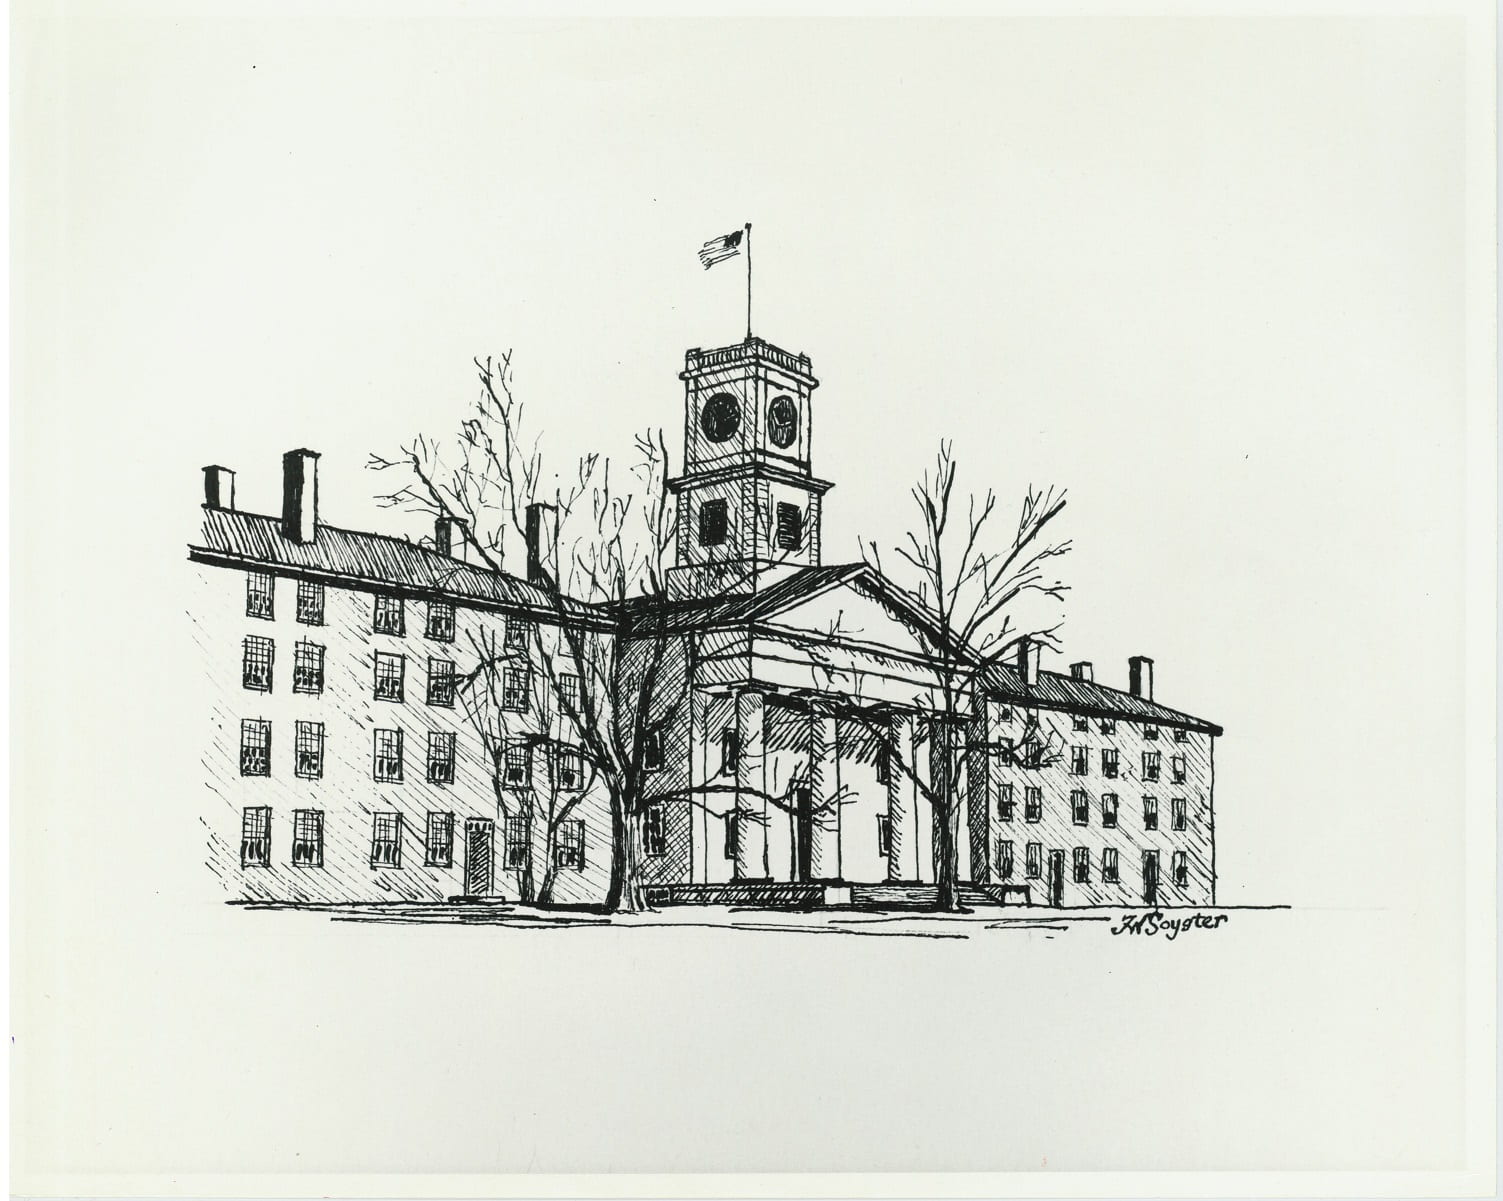 Two four-story brick building with chimneys stand on either side of a chapel fronted by columns. An American flag flies from the clock tower. The trees in front of the buildings are bare.